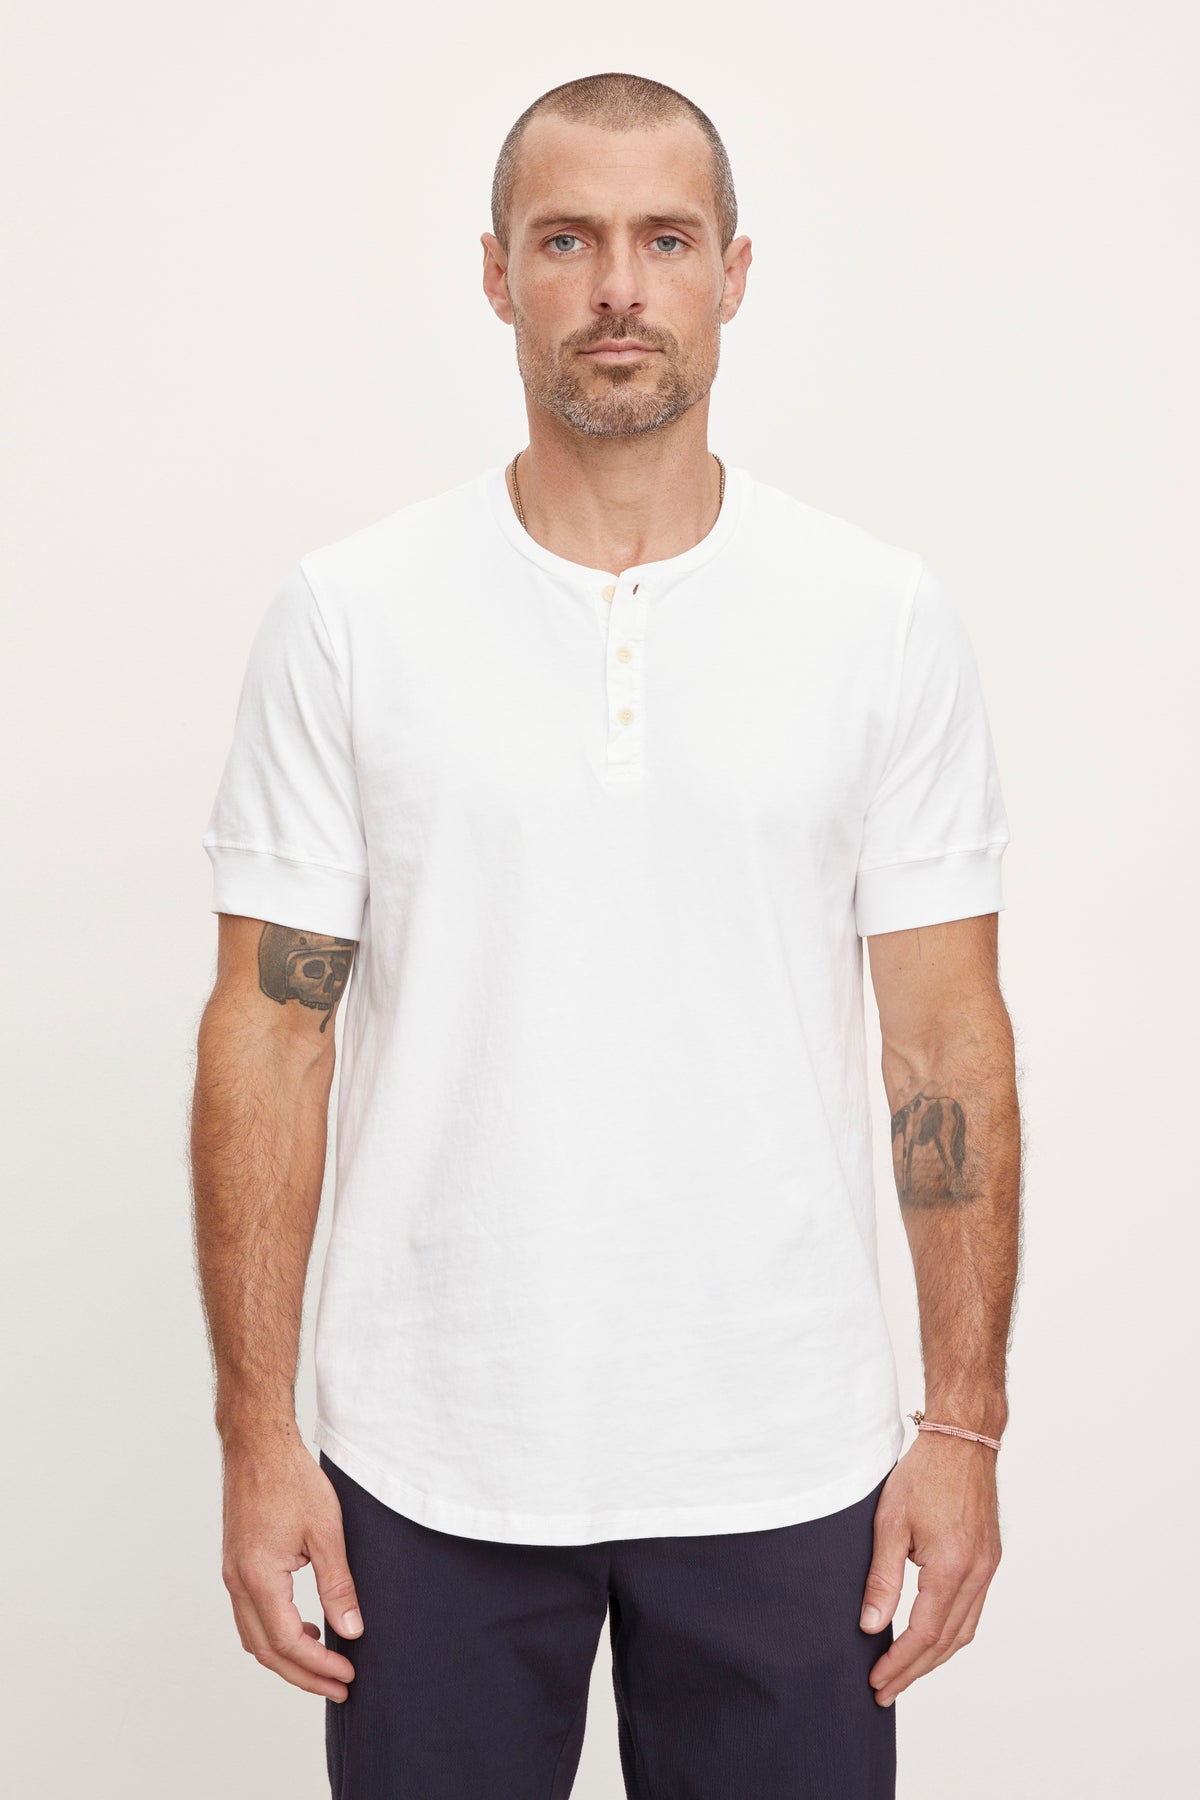 A man with a short haircut and tattoos on his arms stands against a plain background, wearing a white cotton knit DEON HENLEY by Velvet by Graham & Spencer with scooped hem details and dark pants.-36753582948545